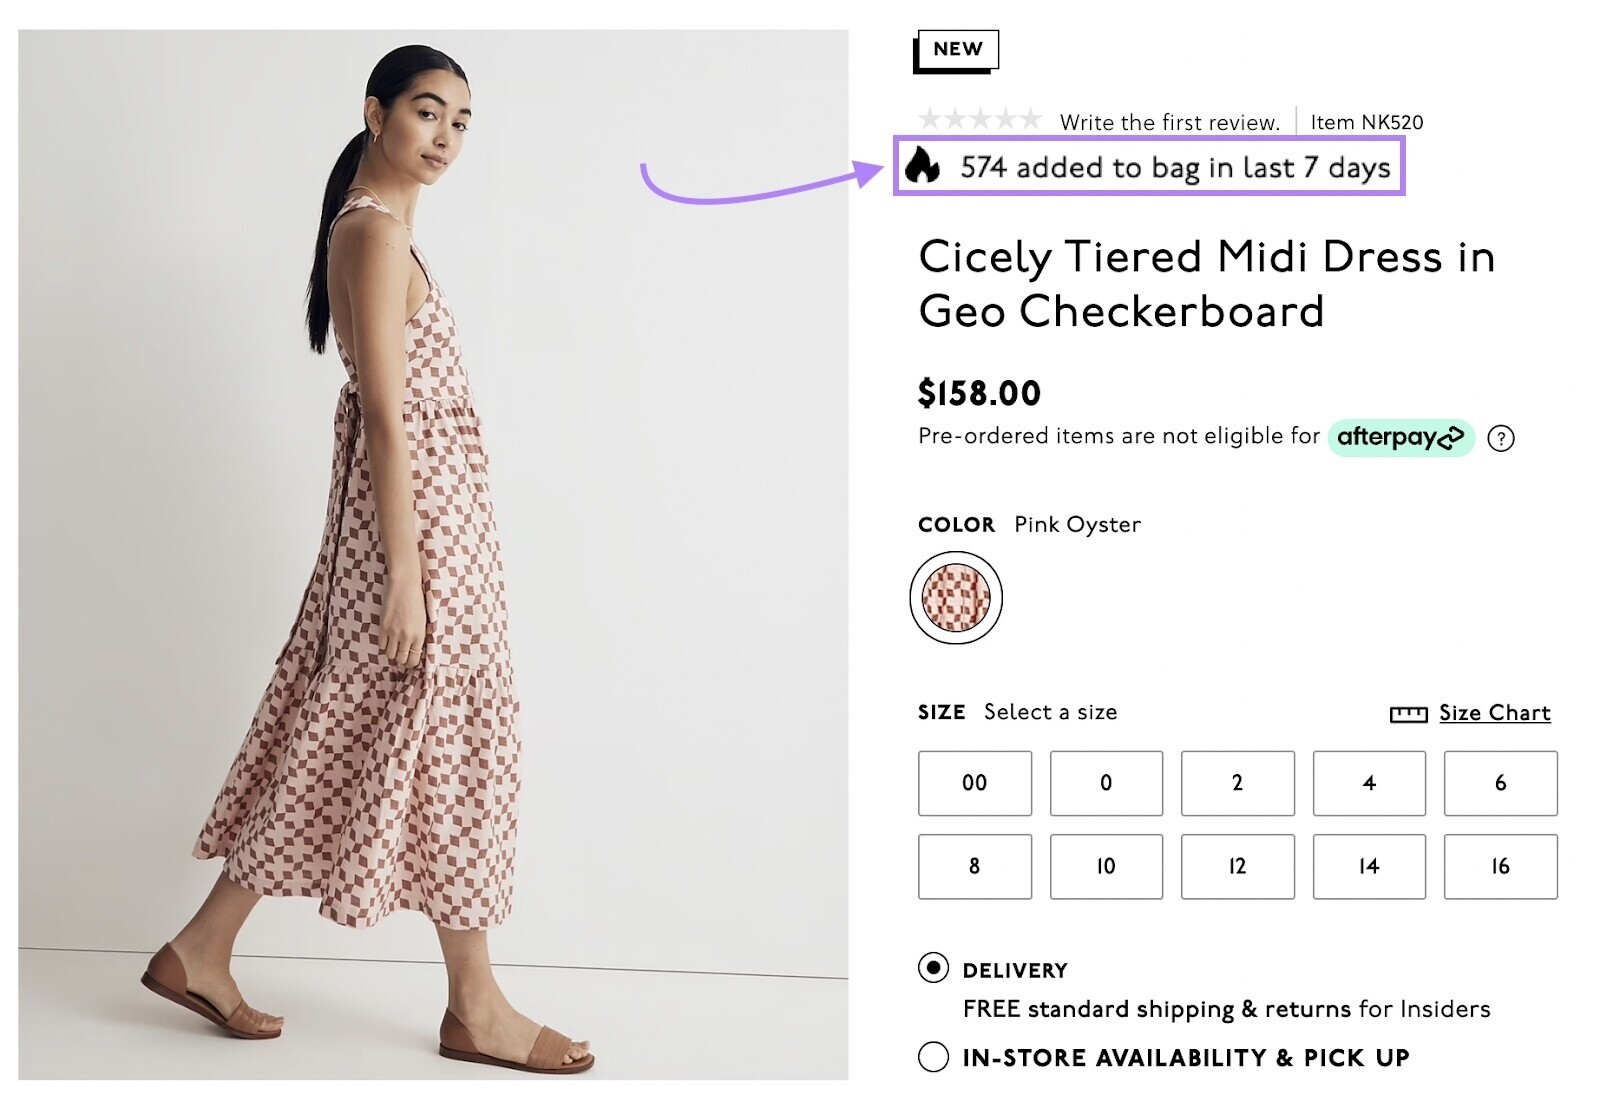 Madewell's product listing showing a message "574 added to bag in last 7 days"